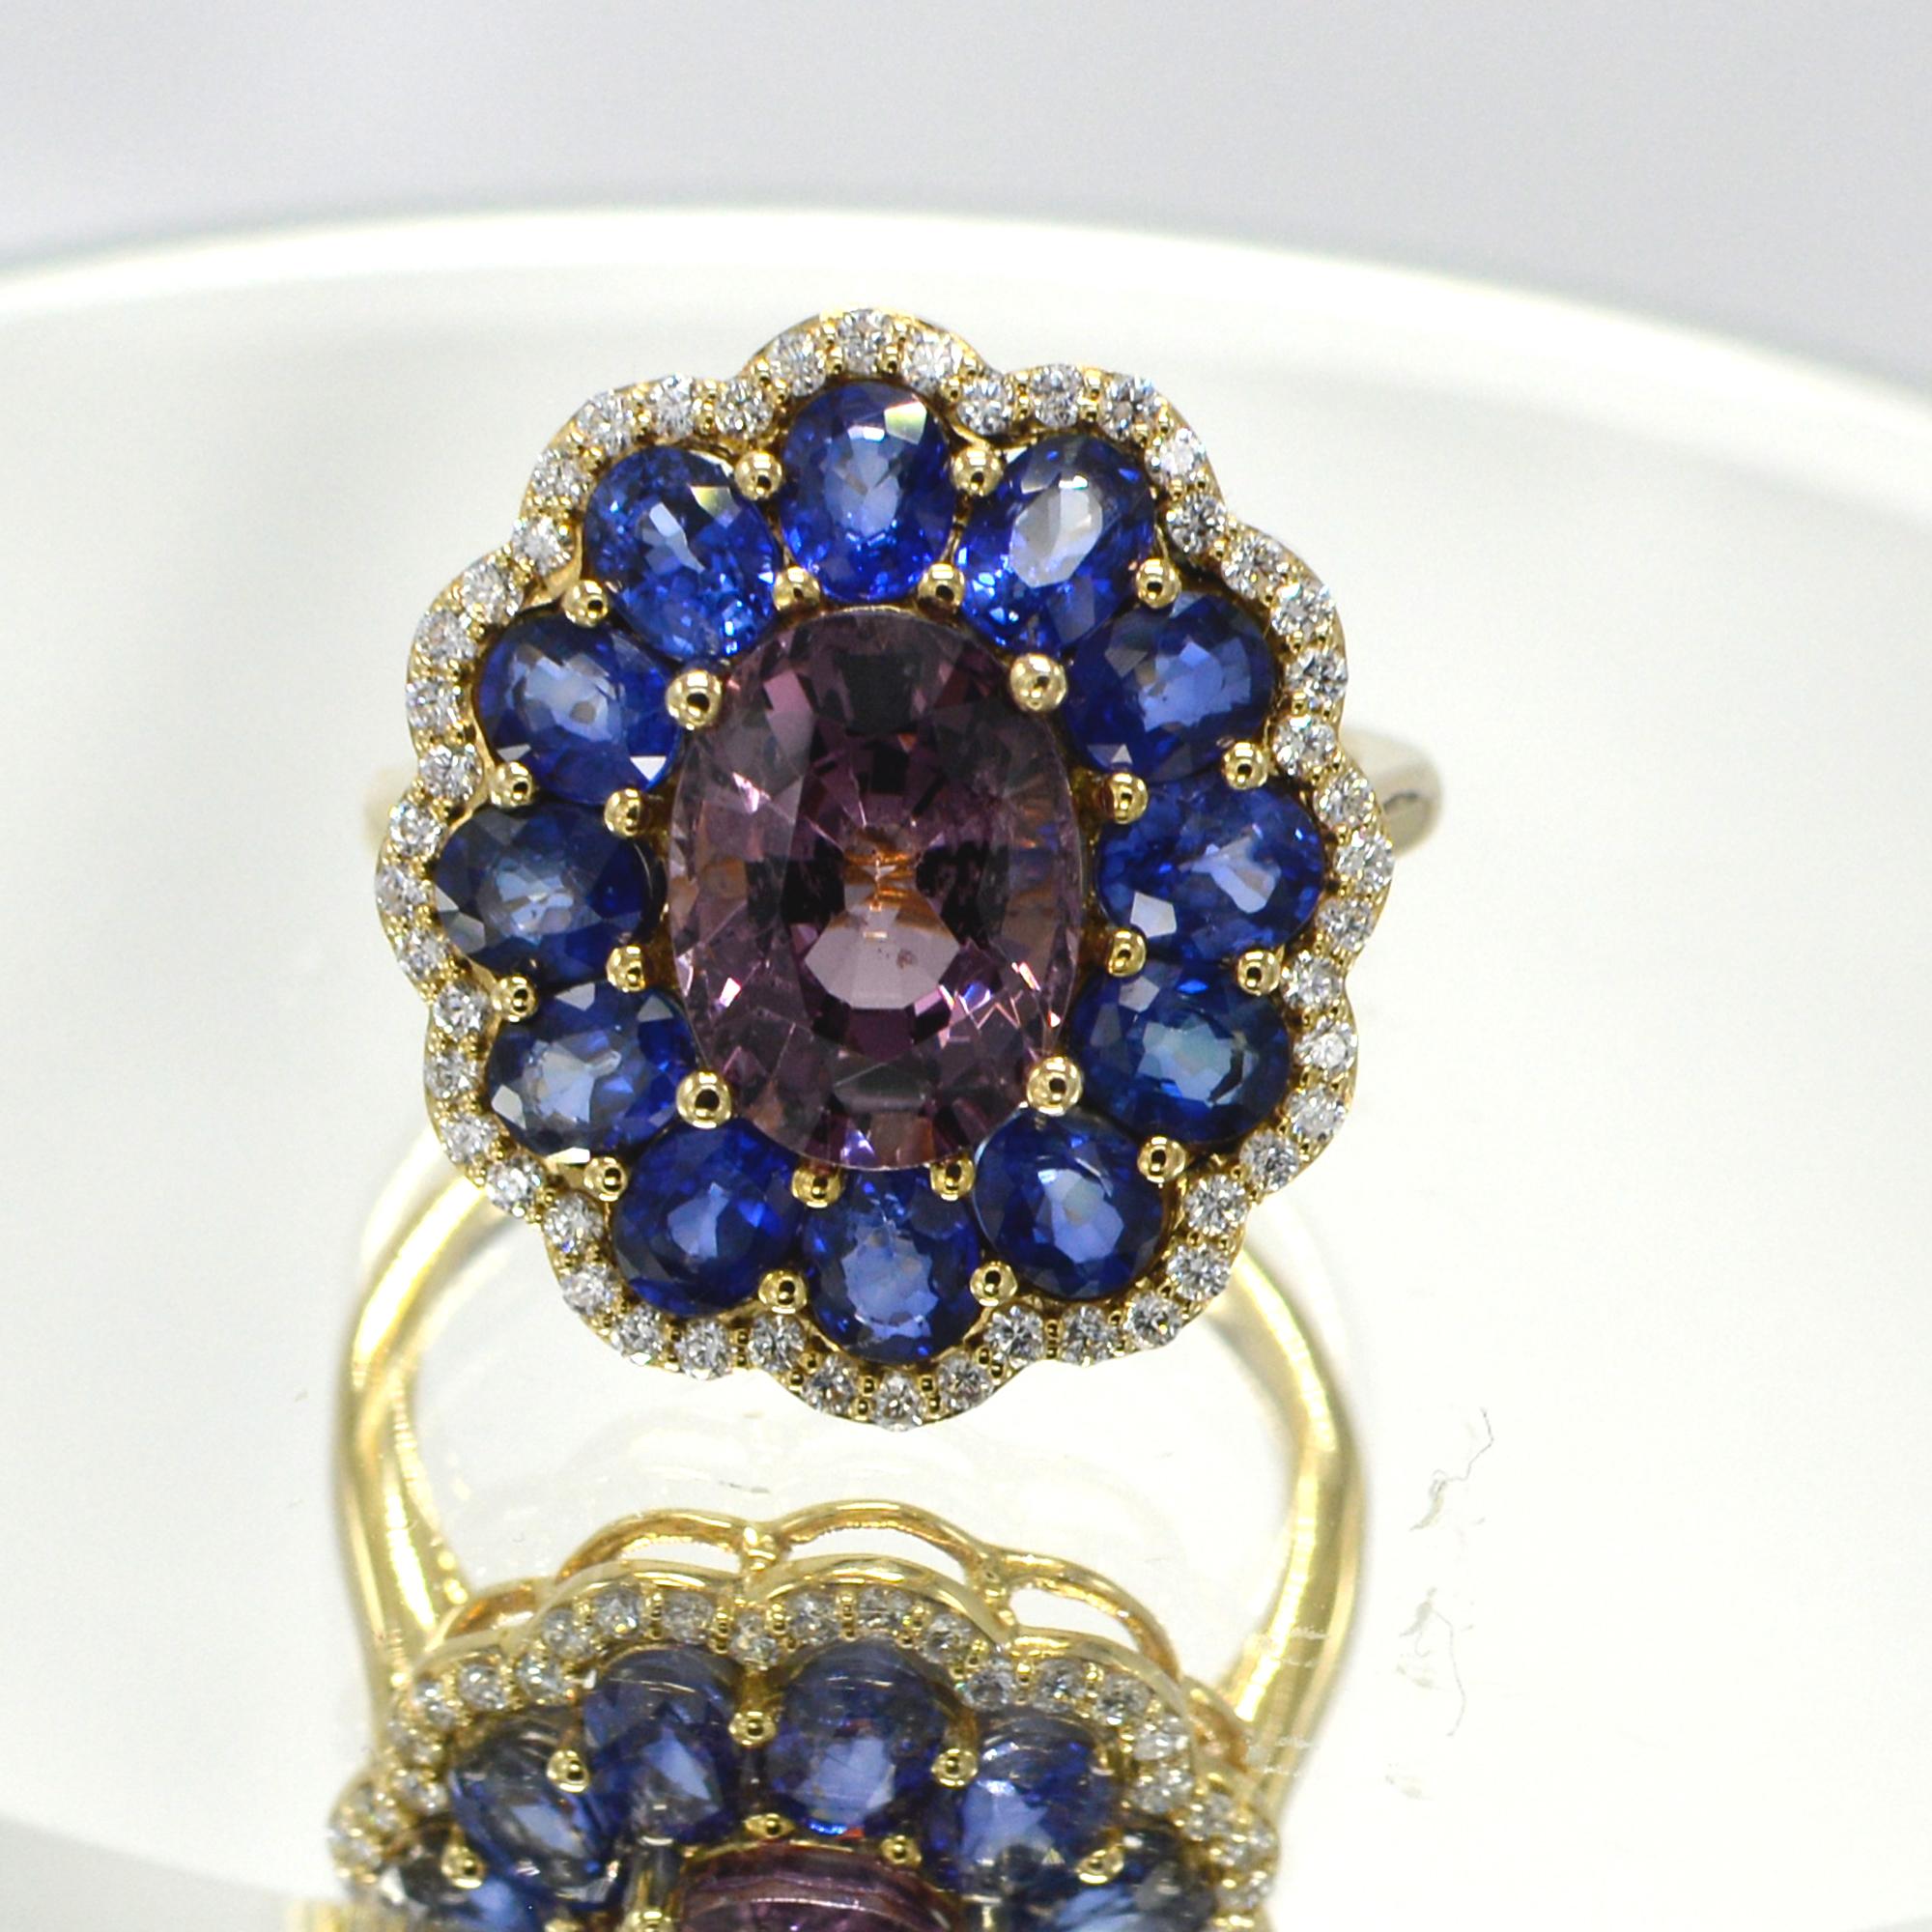 Brilliant -
Blue Sapphire &  Purple Spinel - Oval shape 3.0 carat.
14k Rose Gold  4.70 grams, 
Diamonds 0.30 carat F-G-VVS
Total Blue sapphire 3.0 carat. 
Finger size 7
all stones are natural - and none heated or treated,
overall design area size